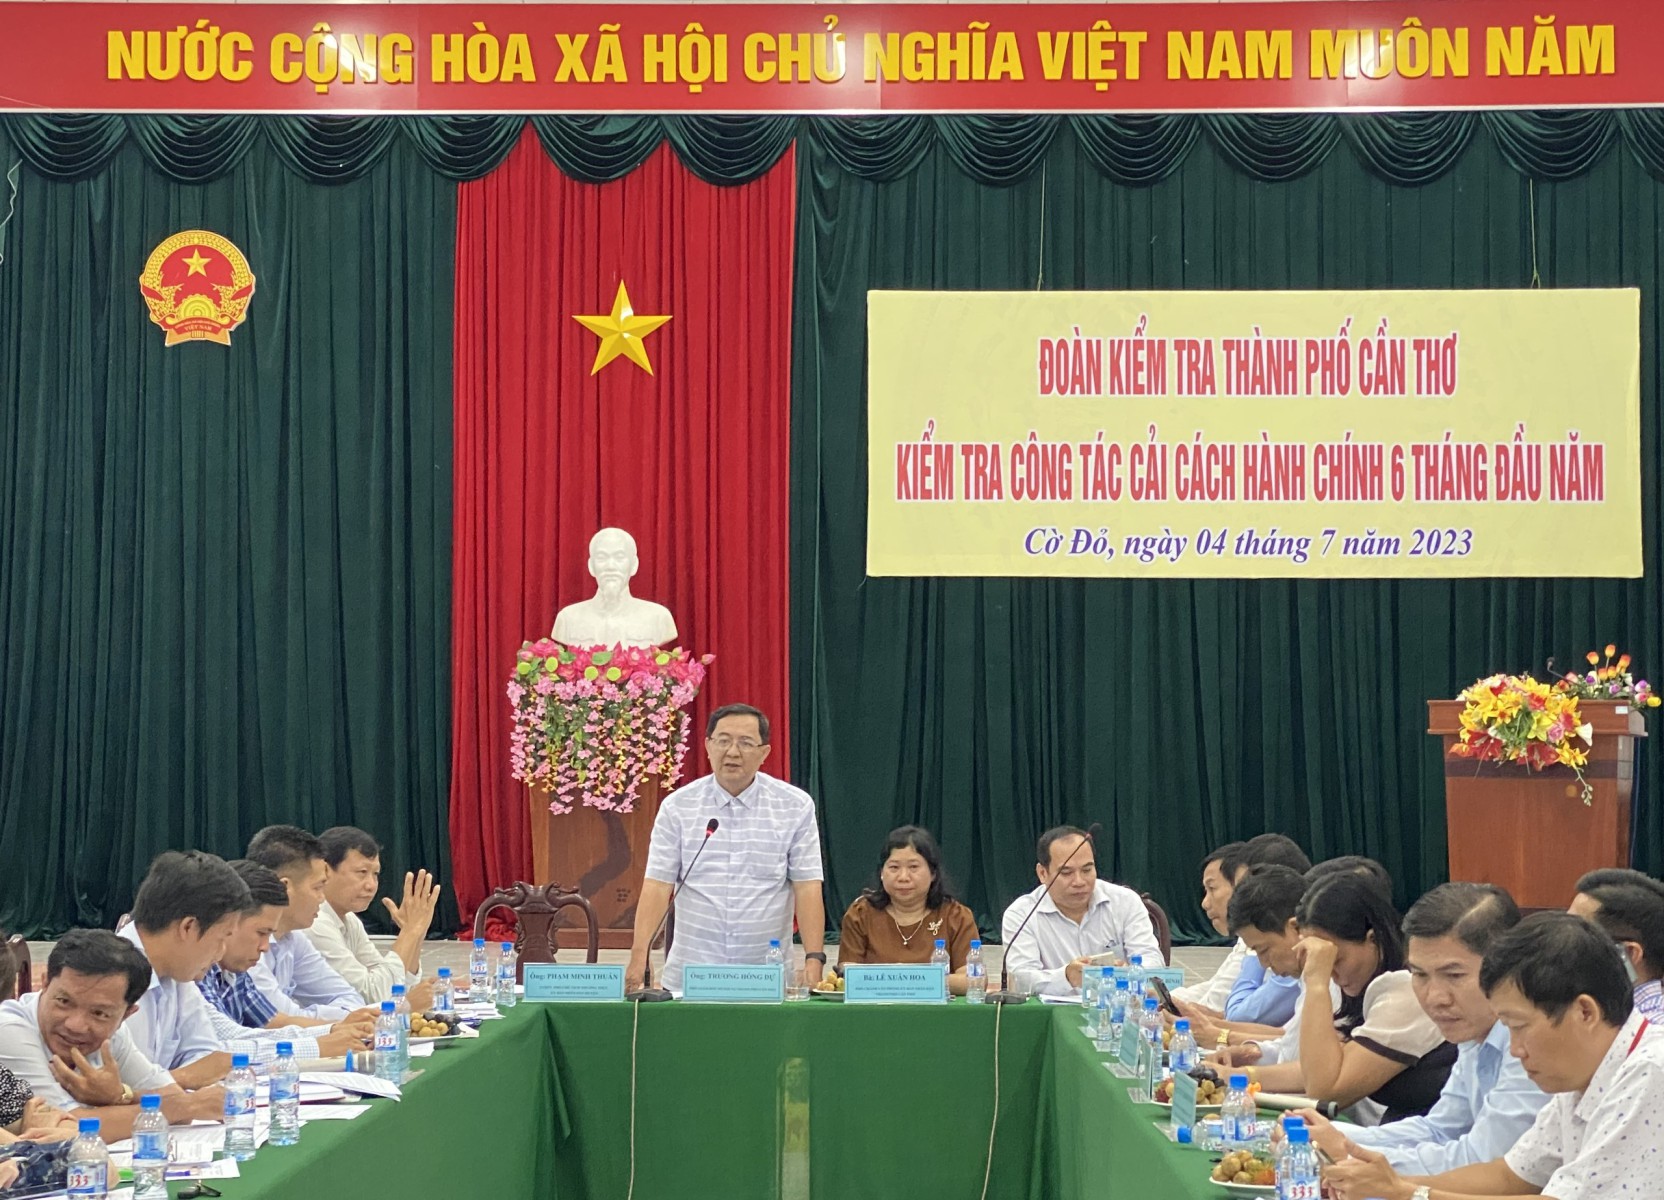 //www.cchccantho.gov.vn/files/images/gallery/anh-hoat-dong/CCHC_2.jpg